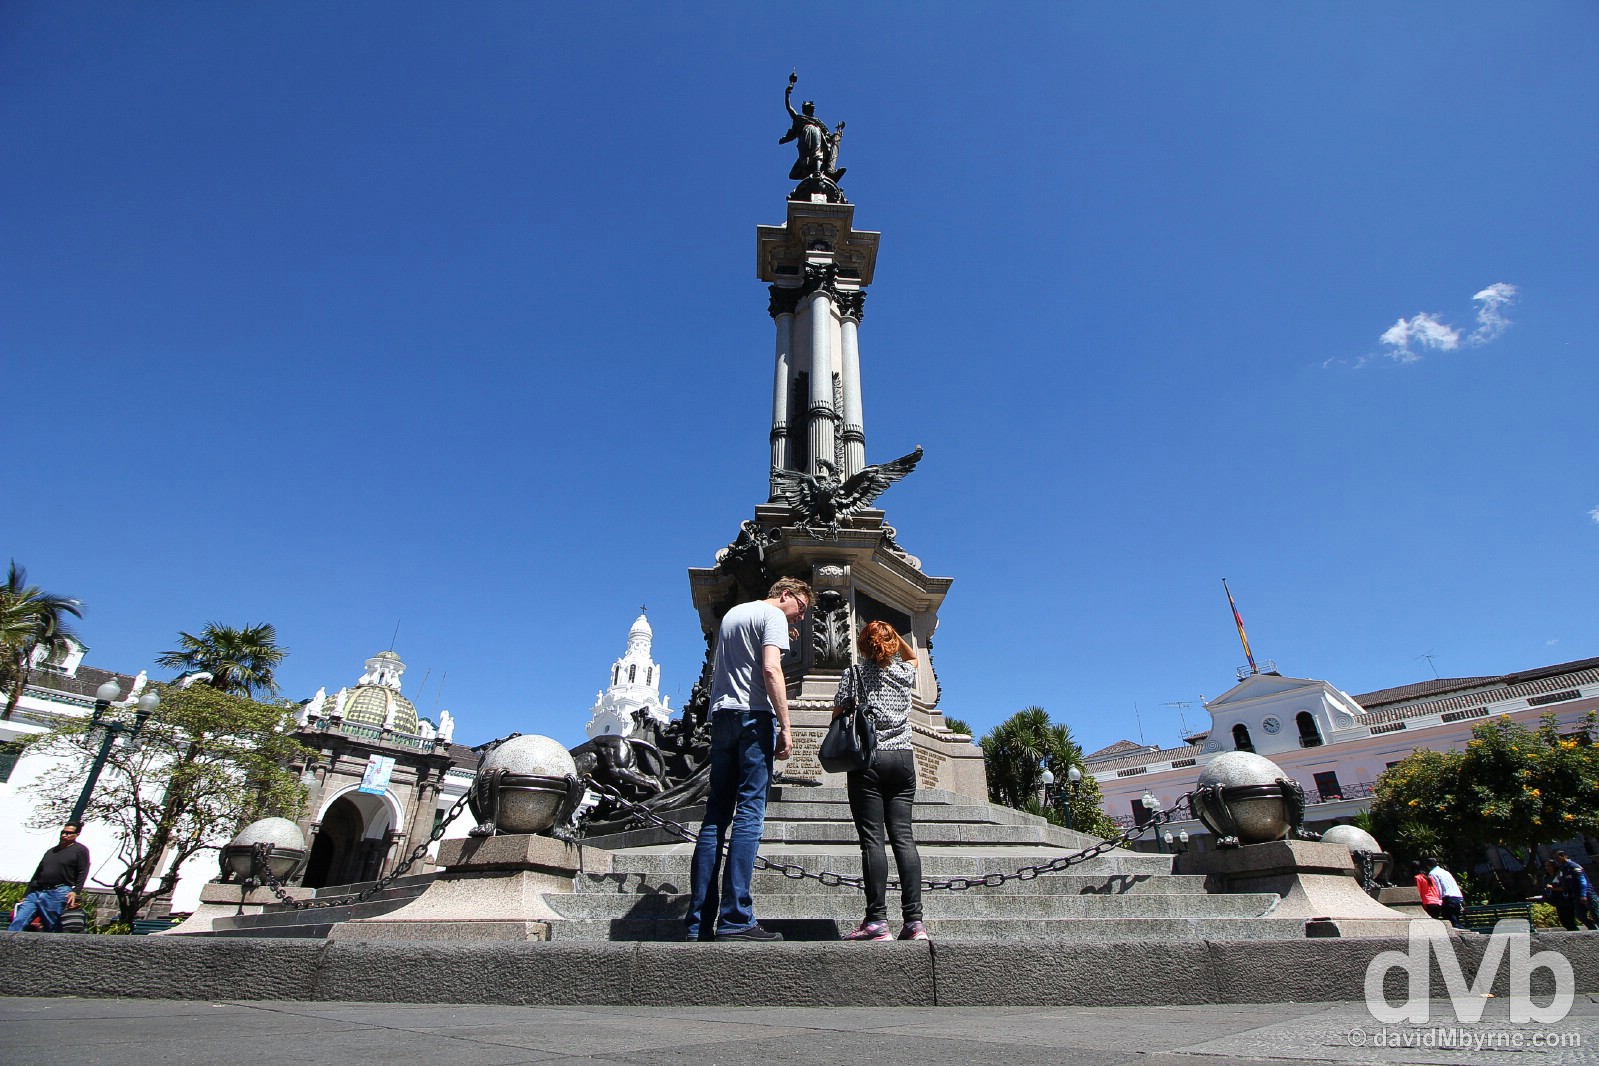 Plaza de la Independencia, one of the three main squares in the UNESCO-listed old town of Quito, Ecuador. July 4, 2015.